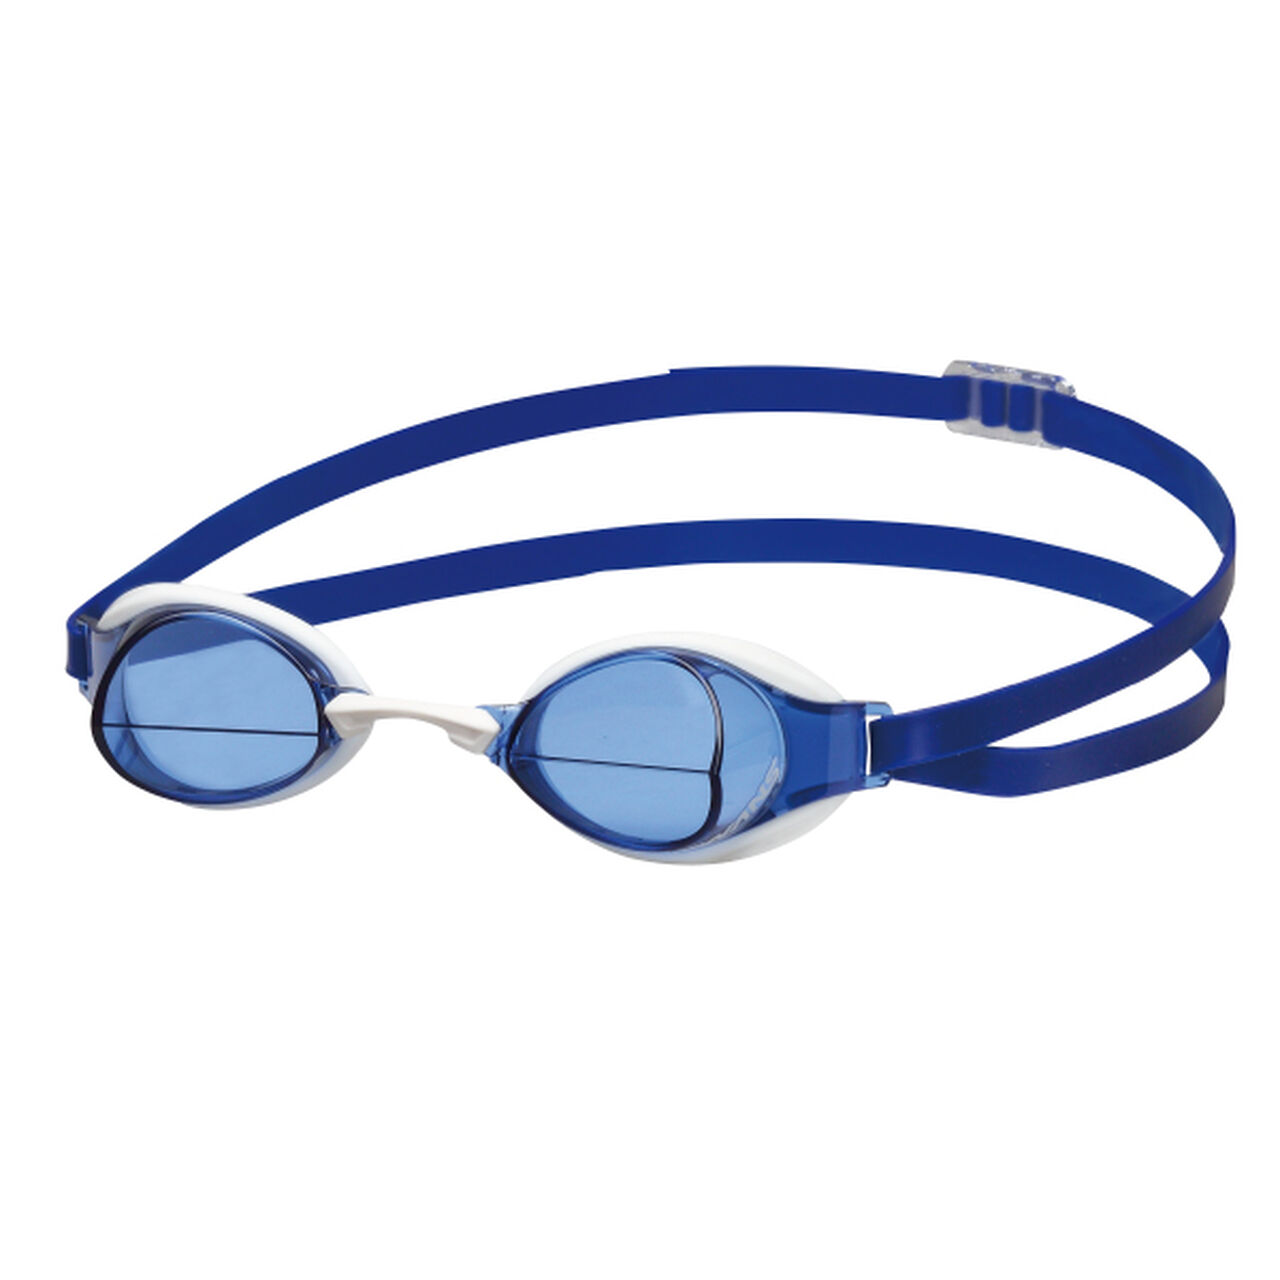 SWANS IGNITION-N NA/W Navy Lens SWIM GOGGLE,Opt2, large image number 0